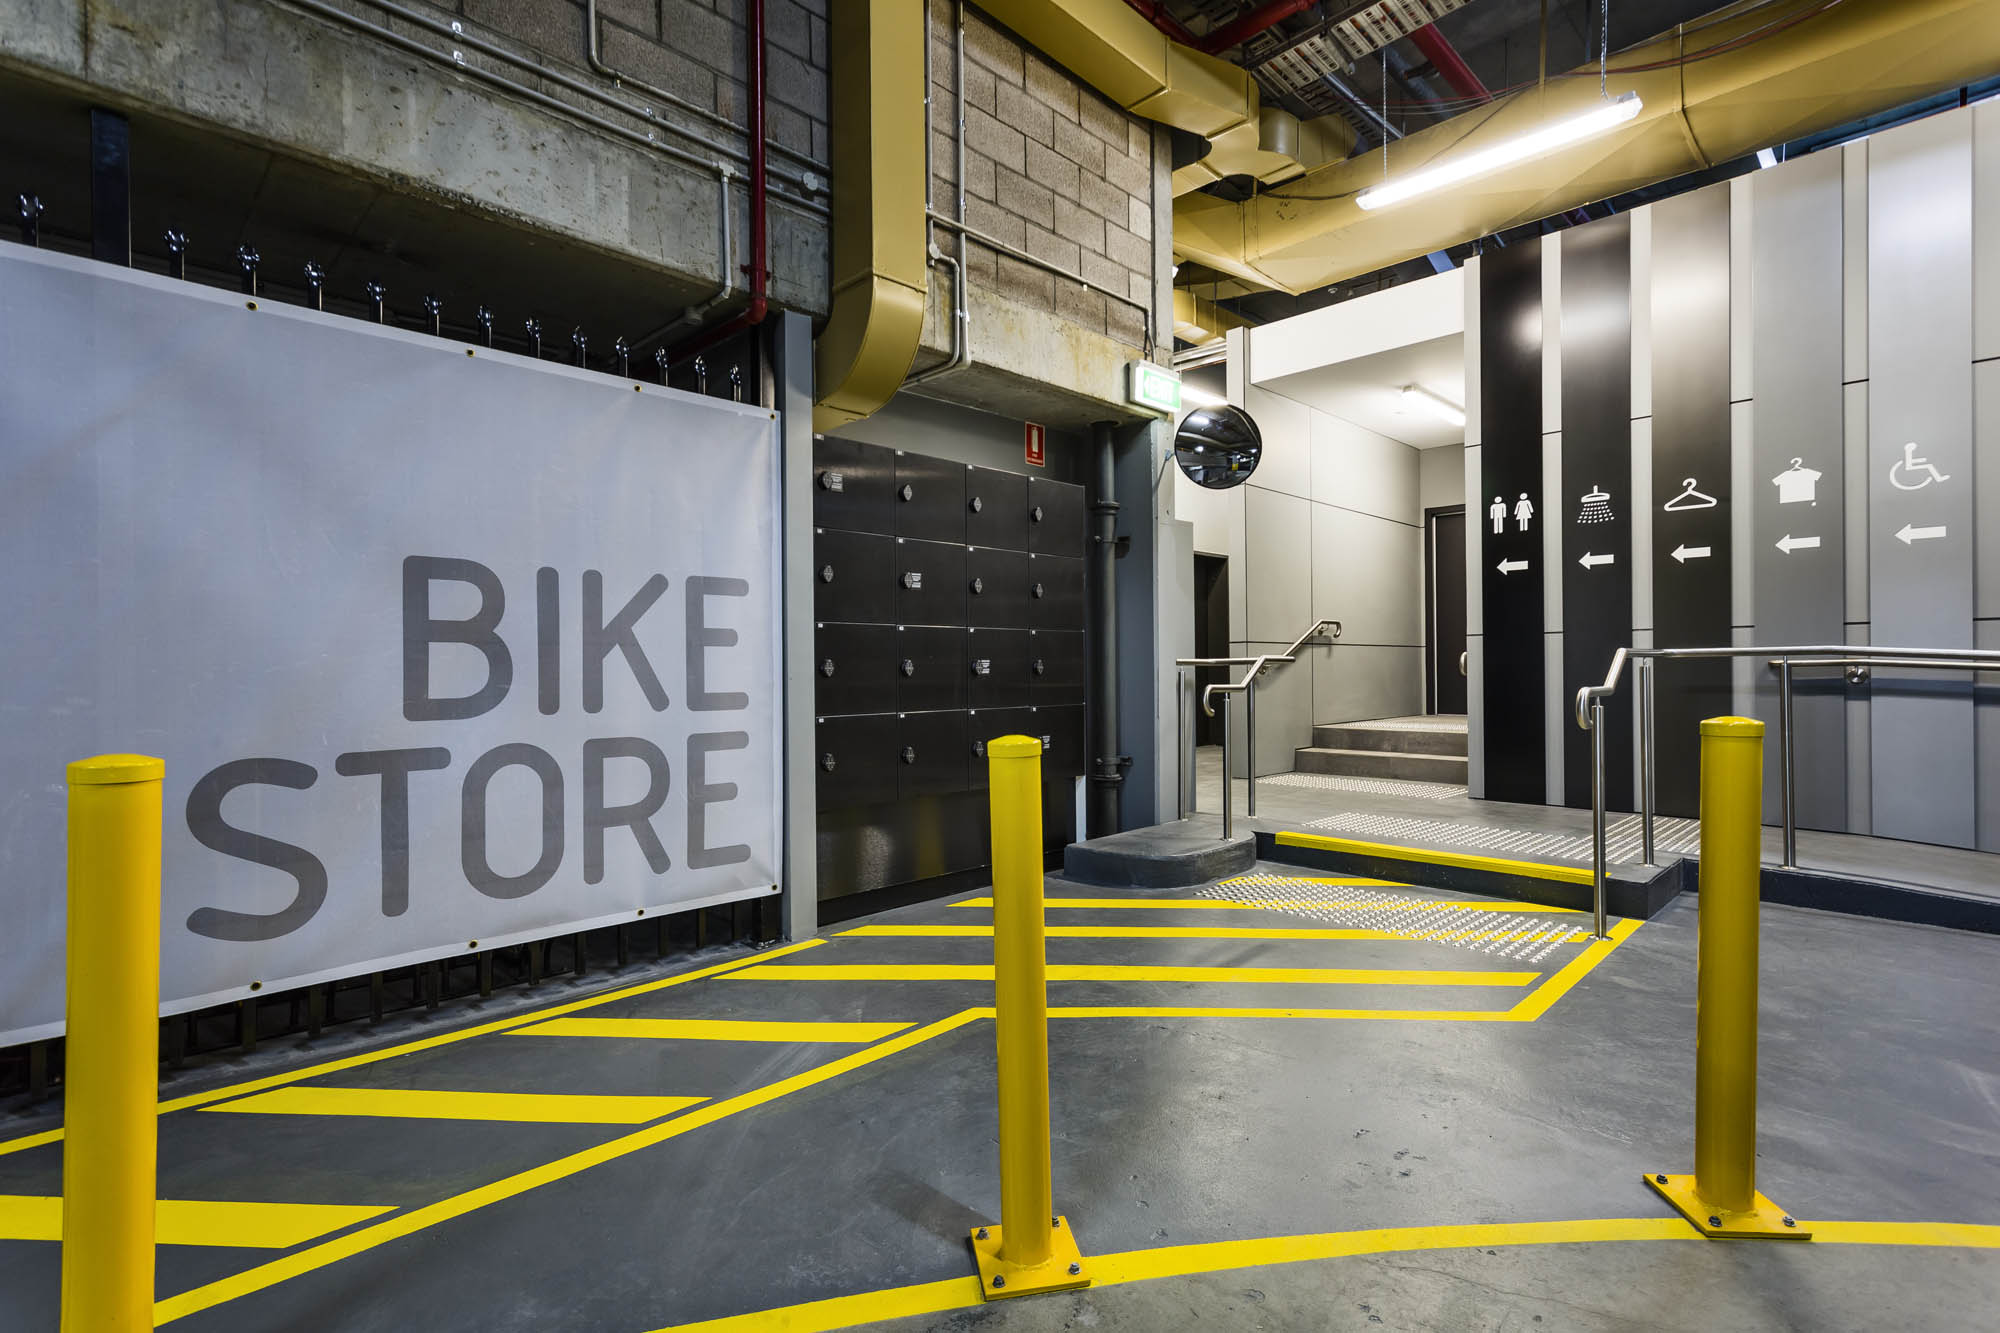 321 kent street sydney end of trip entry bike bicycle storage fitout upgrade